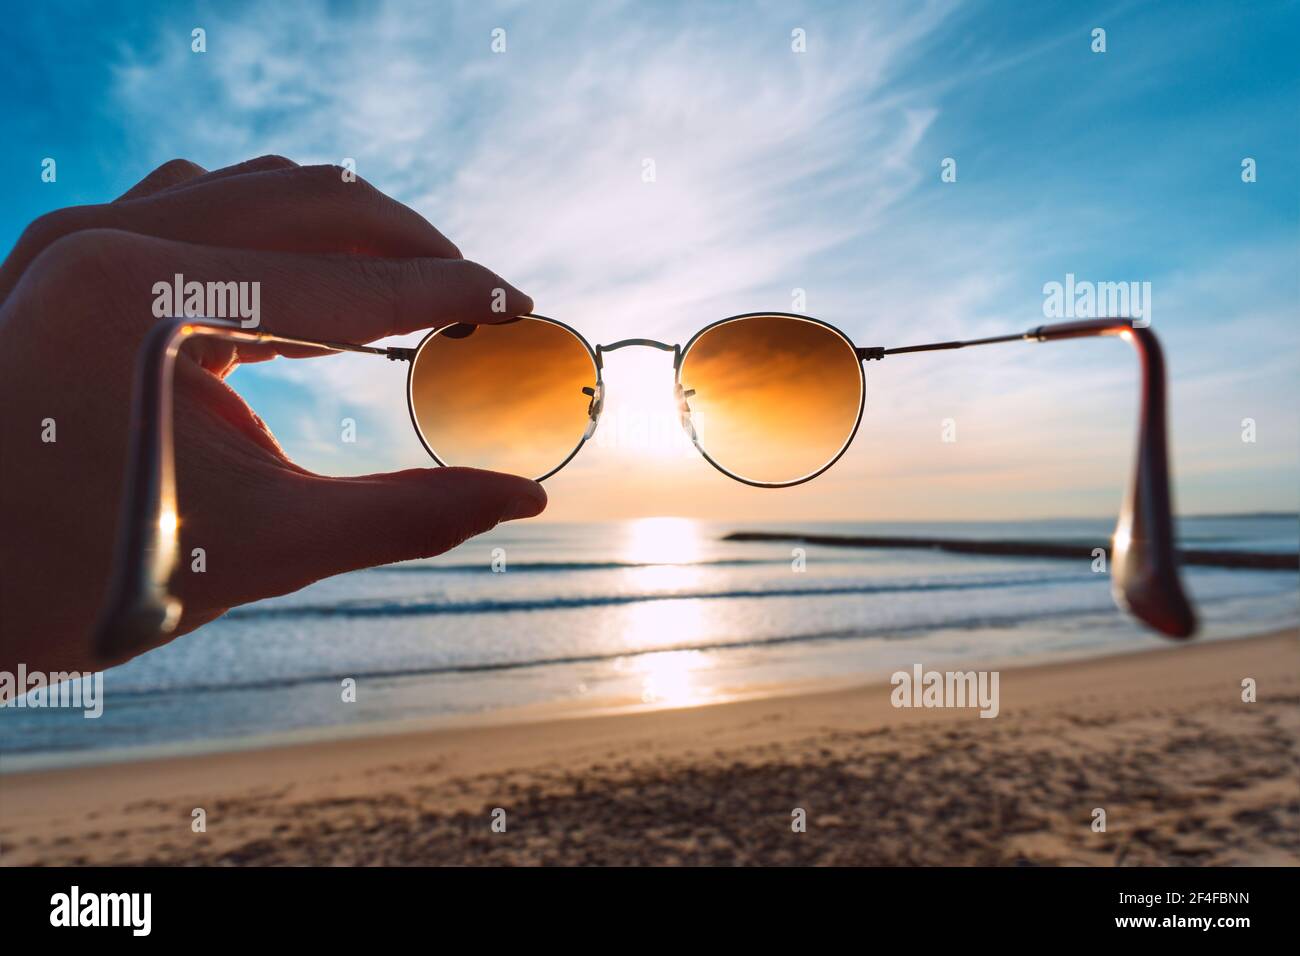 Putting on stylish round polarized sunglasses with brown lenses at sunset Stock Photo